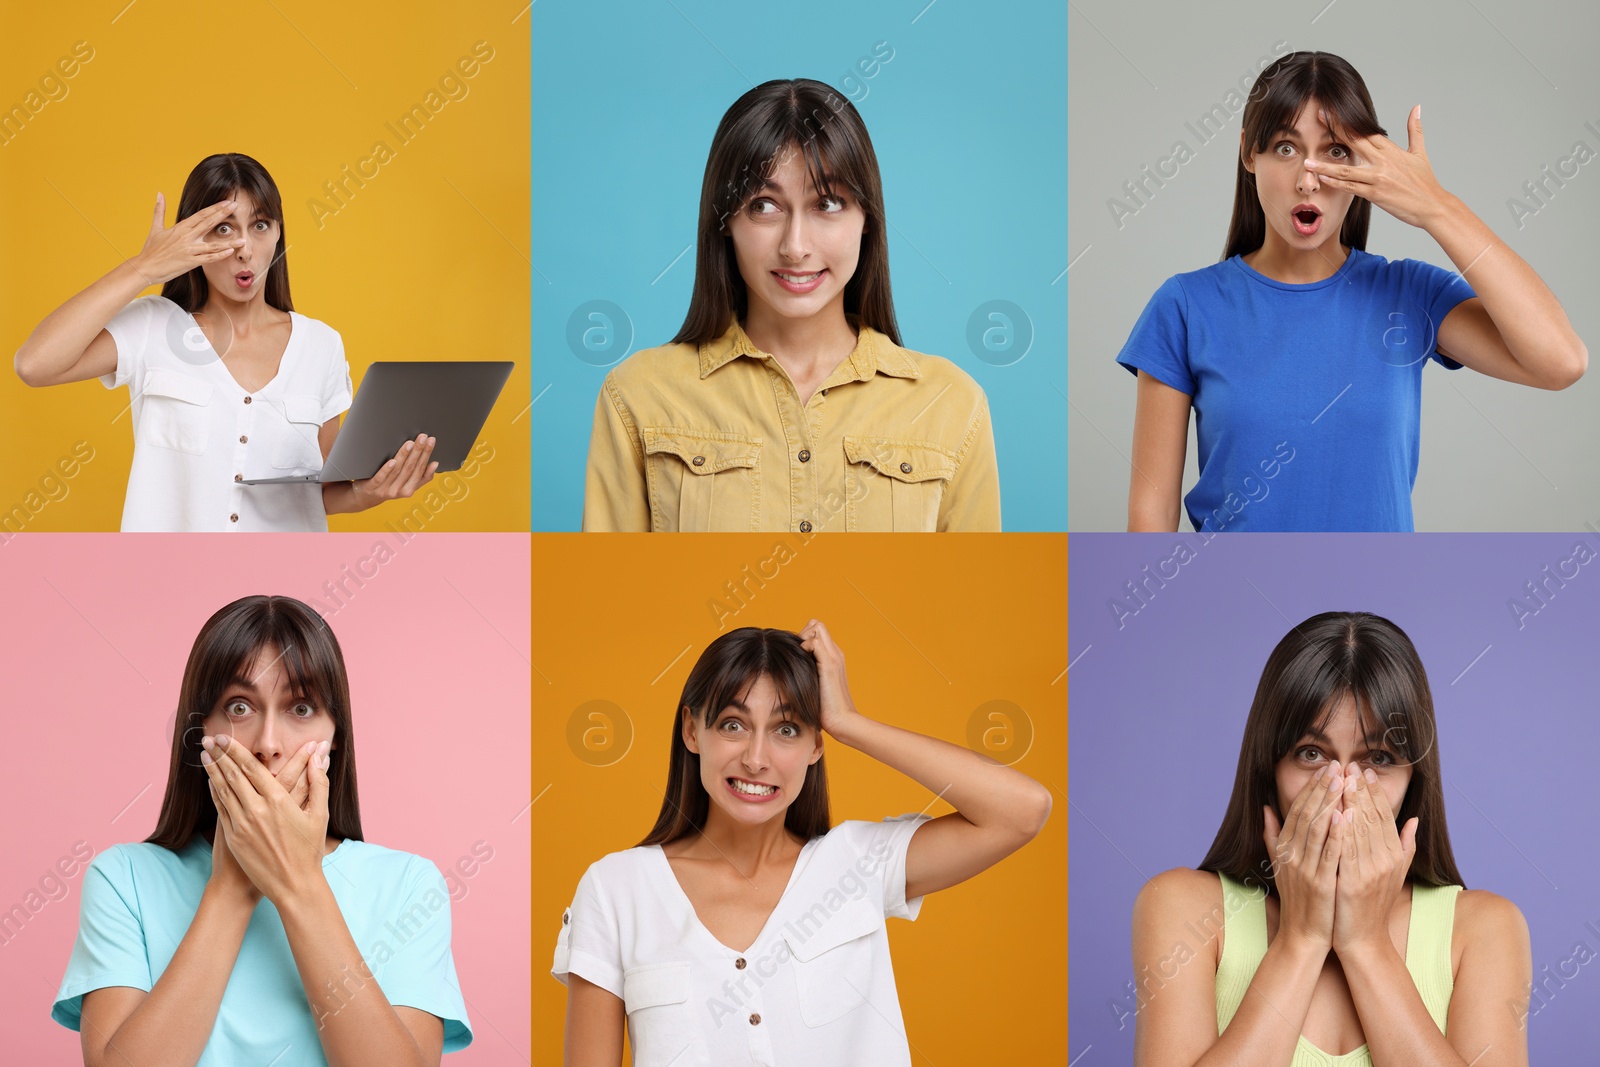 Image of Collage with photos of embarrassed woman on different color backgrounds